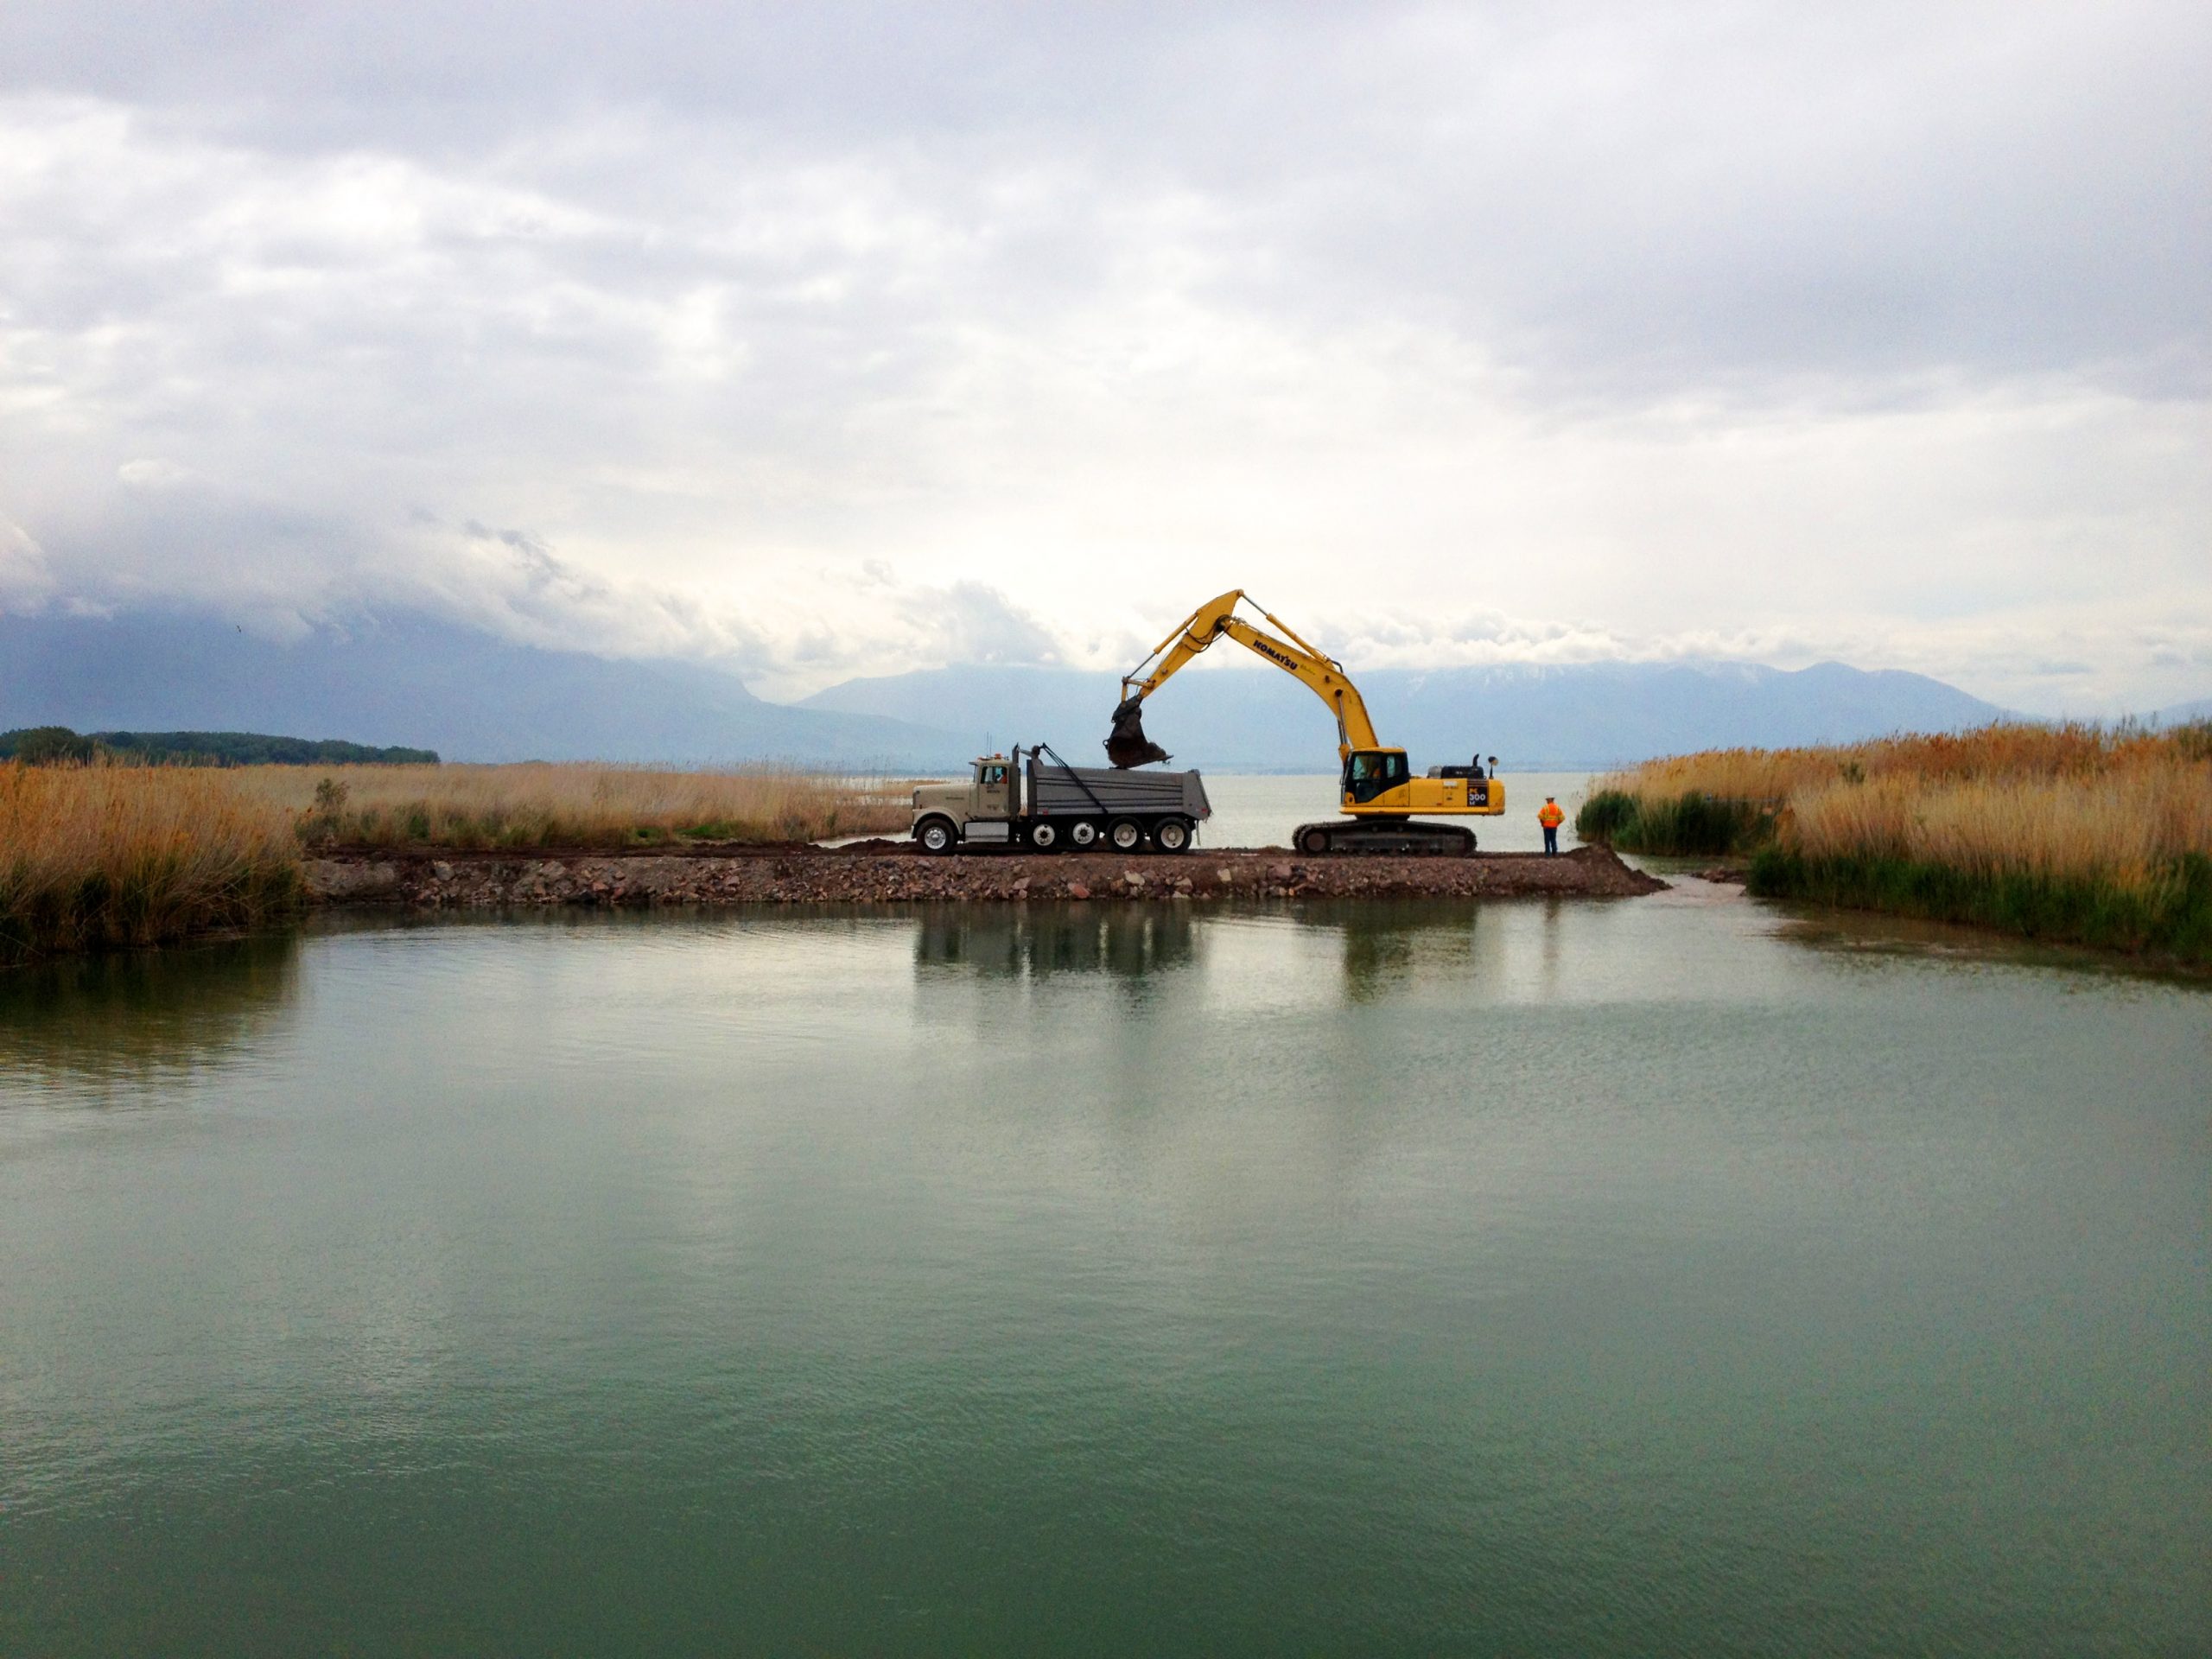 Truck parked at Utah lake as excavator fills tuck bed with dirt.